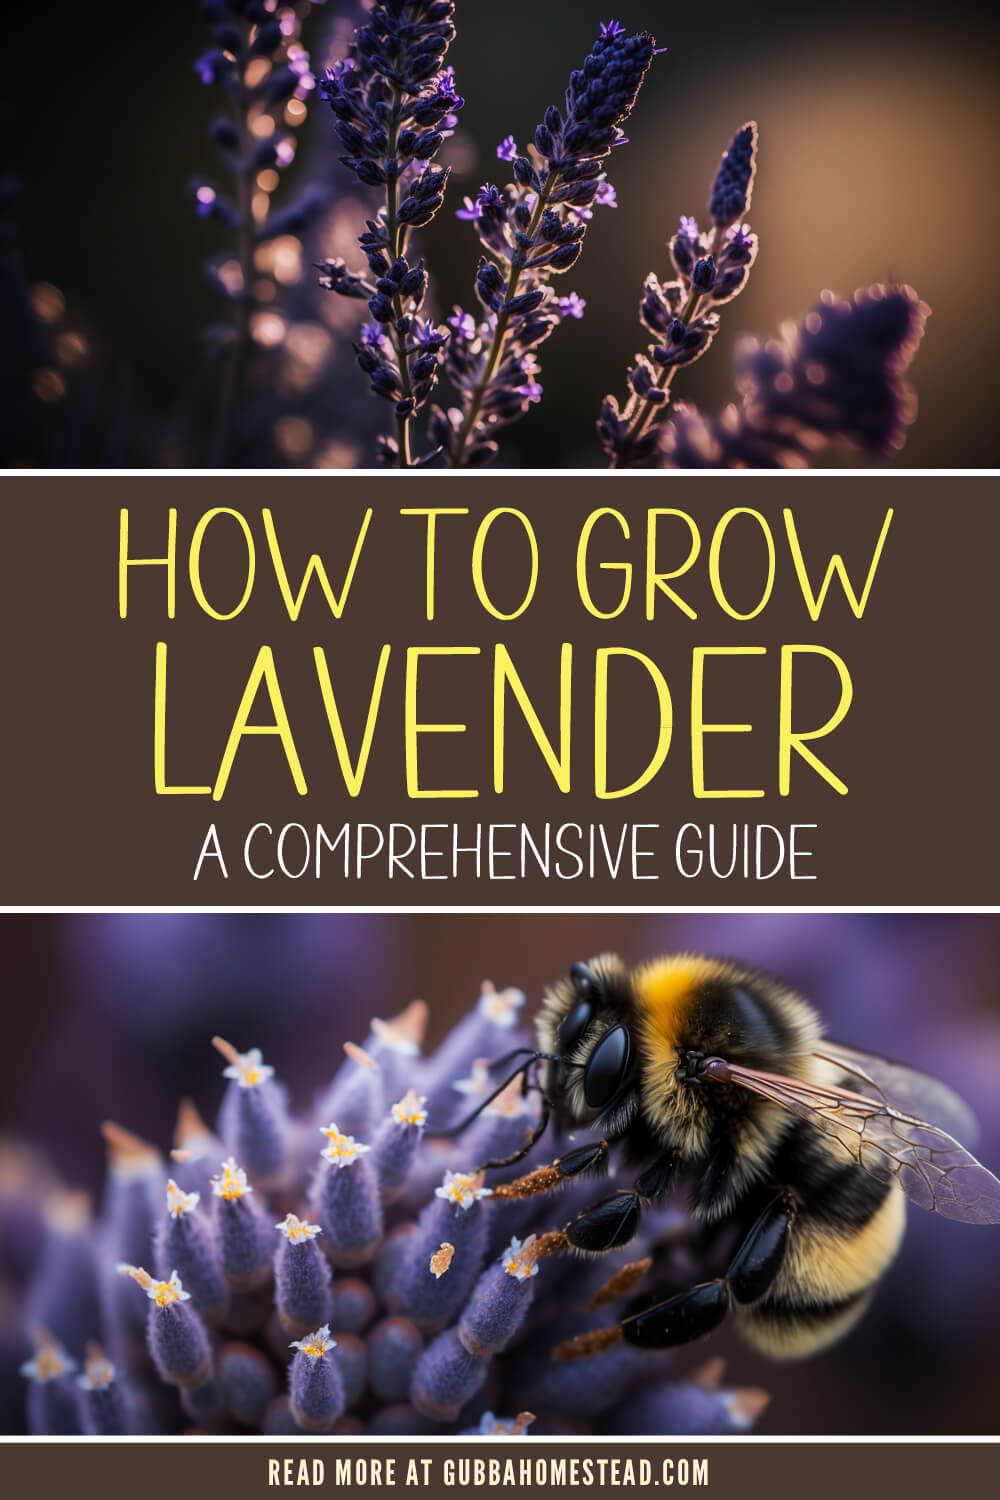 How To Grow Lavender: A Comprehensive Guide